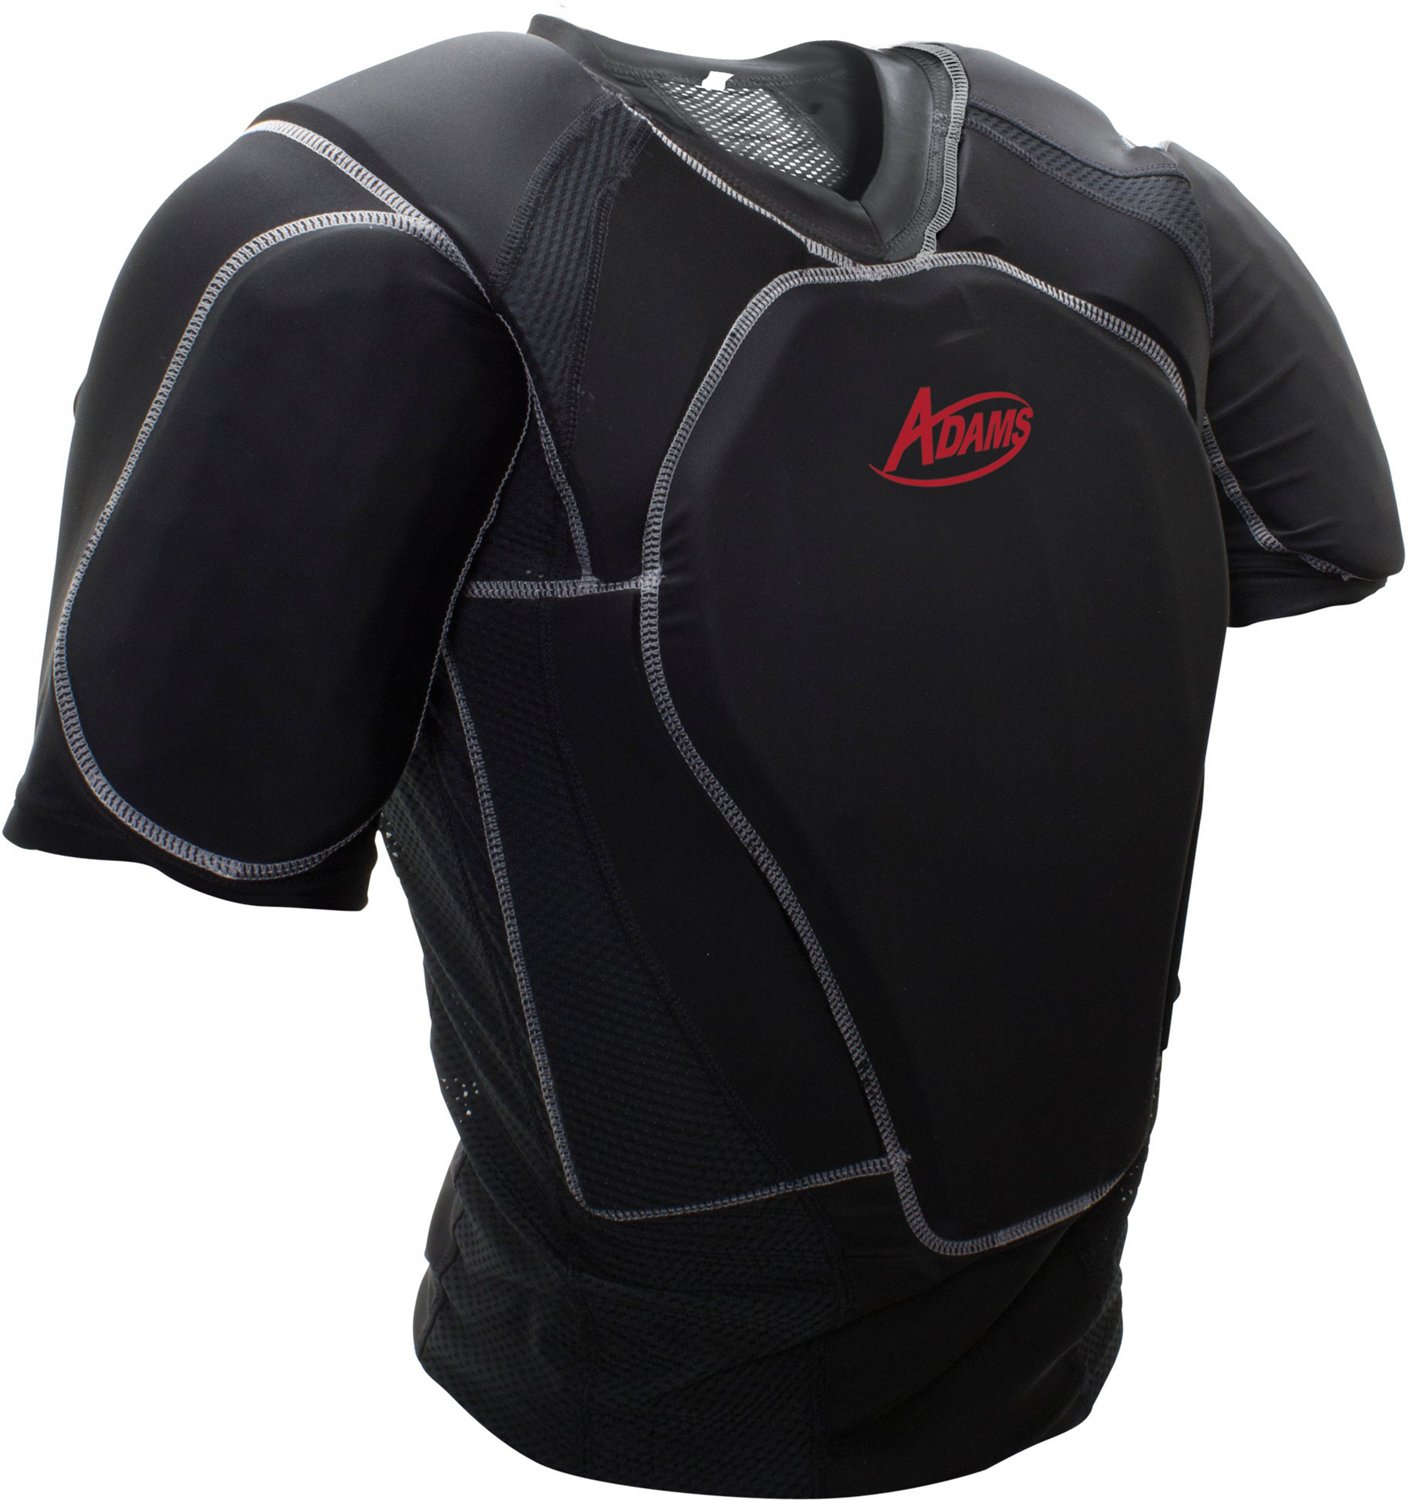 Adams Adults' Low-Profile Umpire Chest Protector | Academy